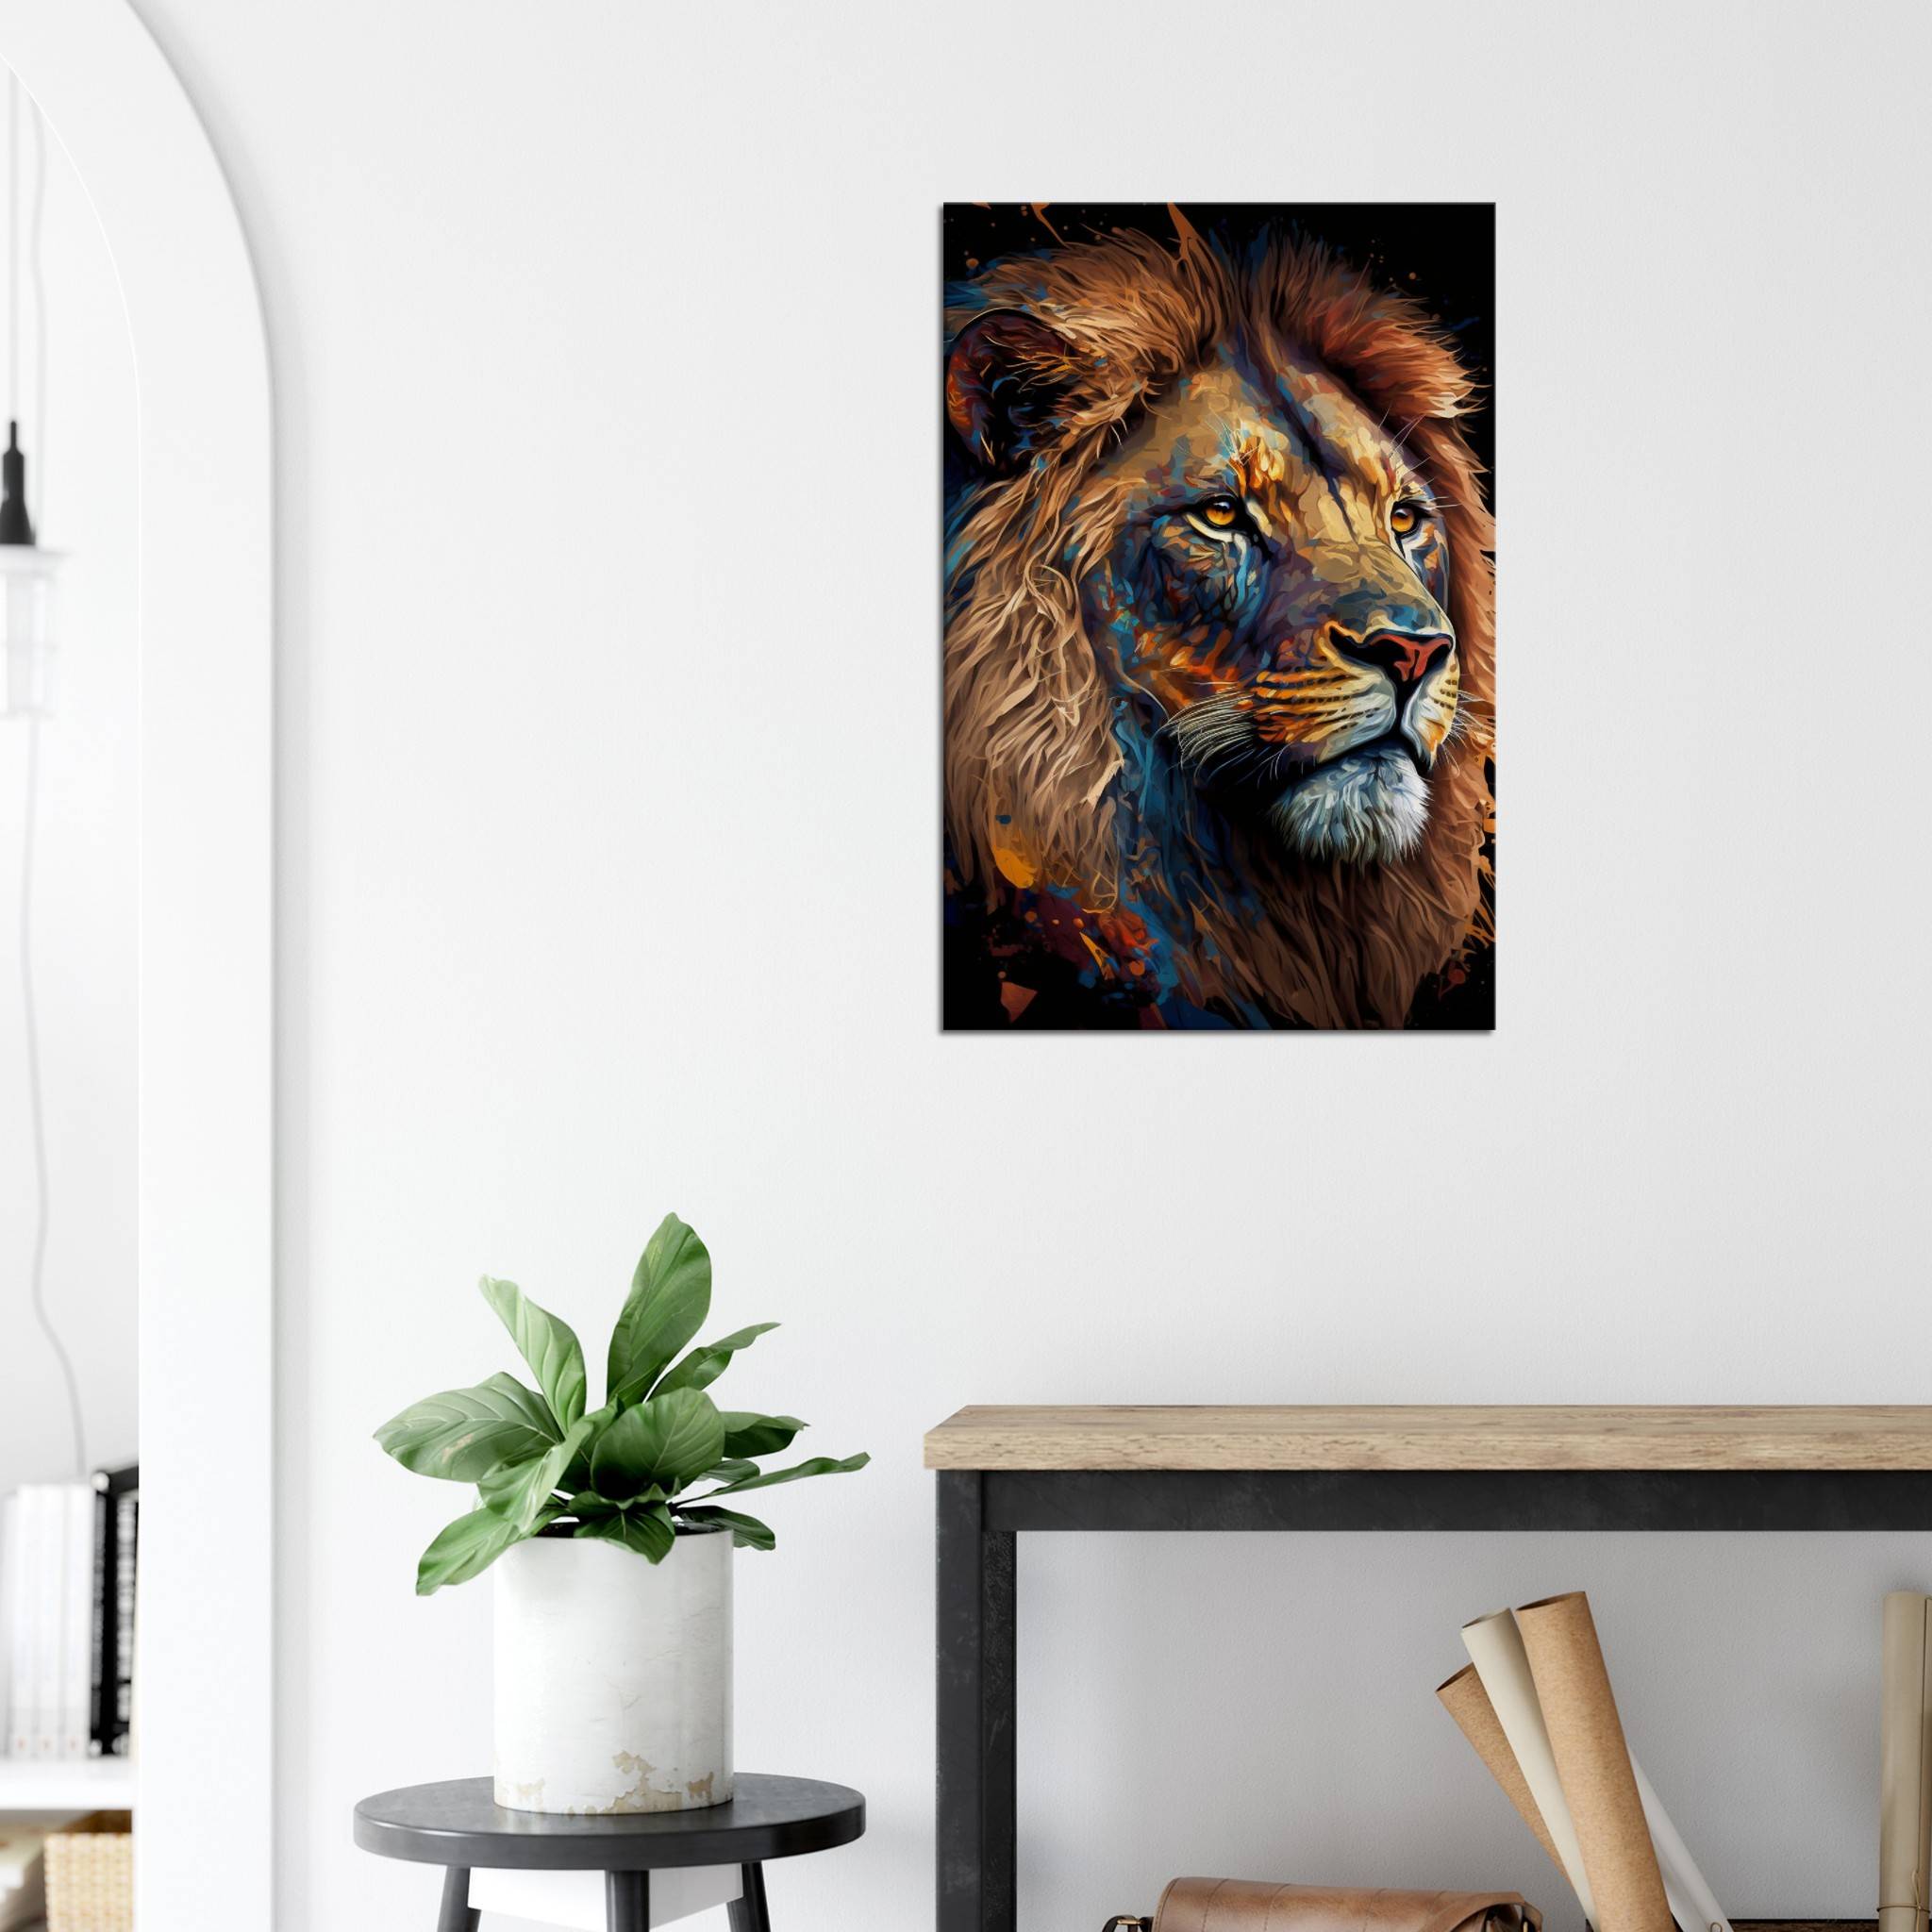 Lion Close to Reality 3 / 50 x 75 cm (Canvas Print) Canvas Print Canvas reproduction The Pianist Print On Demand Fabled Gallery https://fabledgallery.art/product/lion-close-to-reality-3-50-x-75-cm-canvas-print/